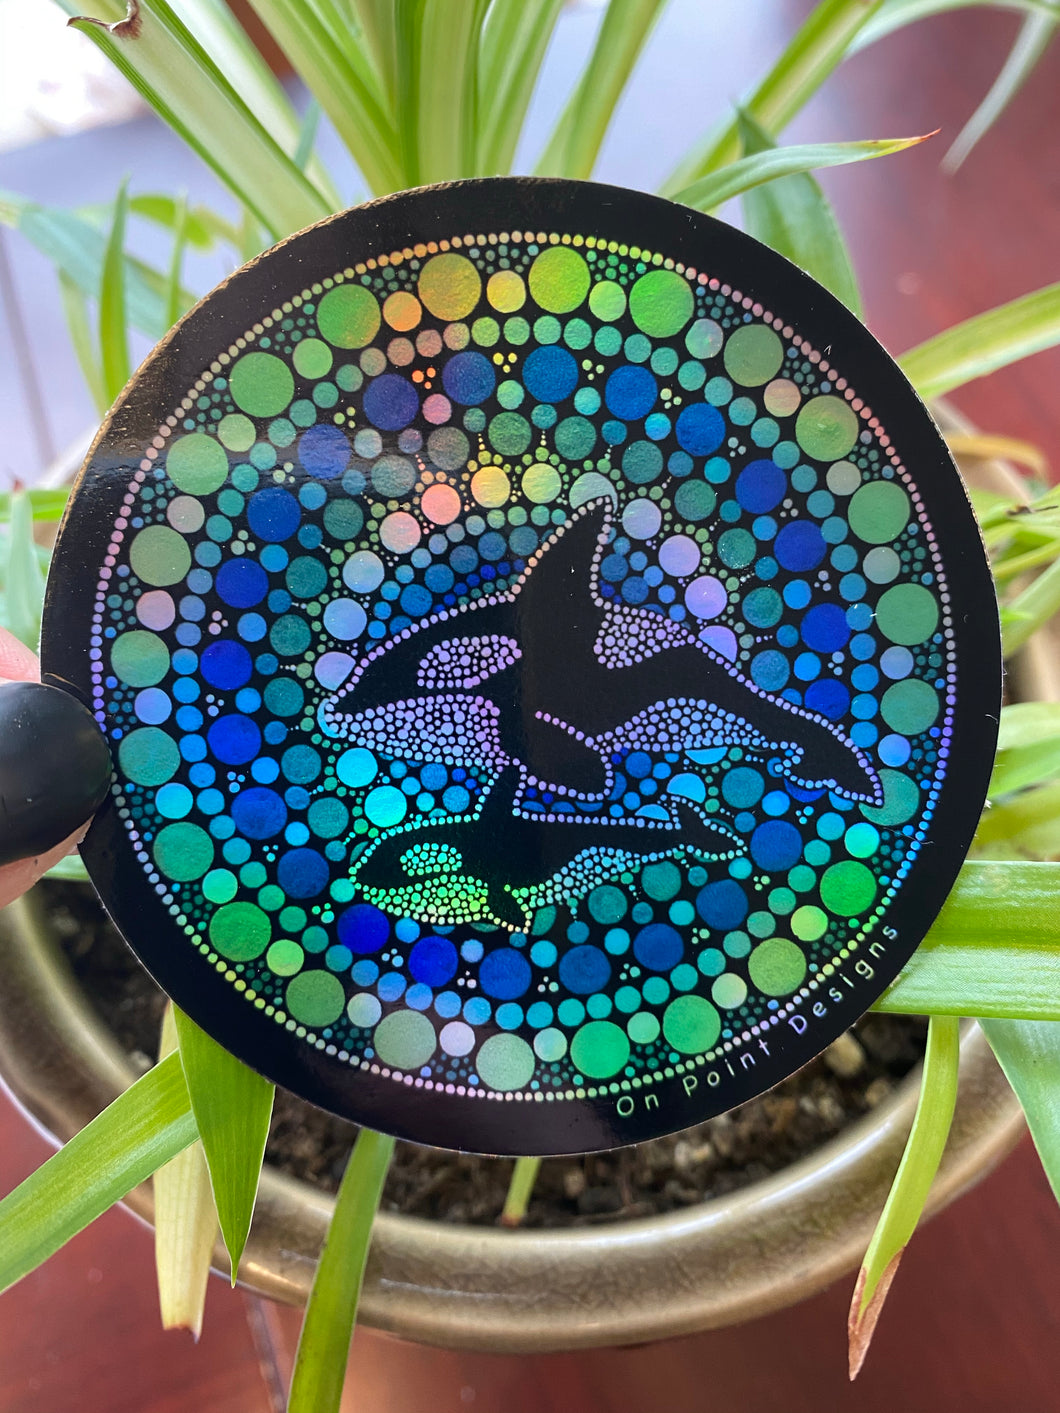 Holographic Killer Whale Circle Sticker